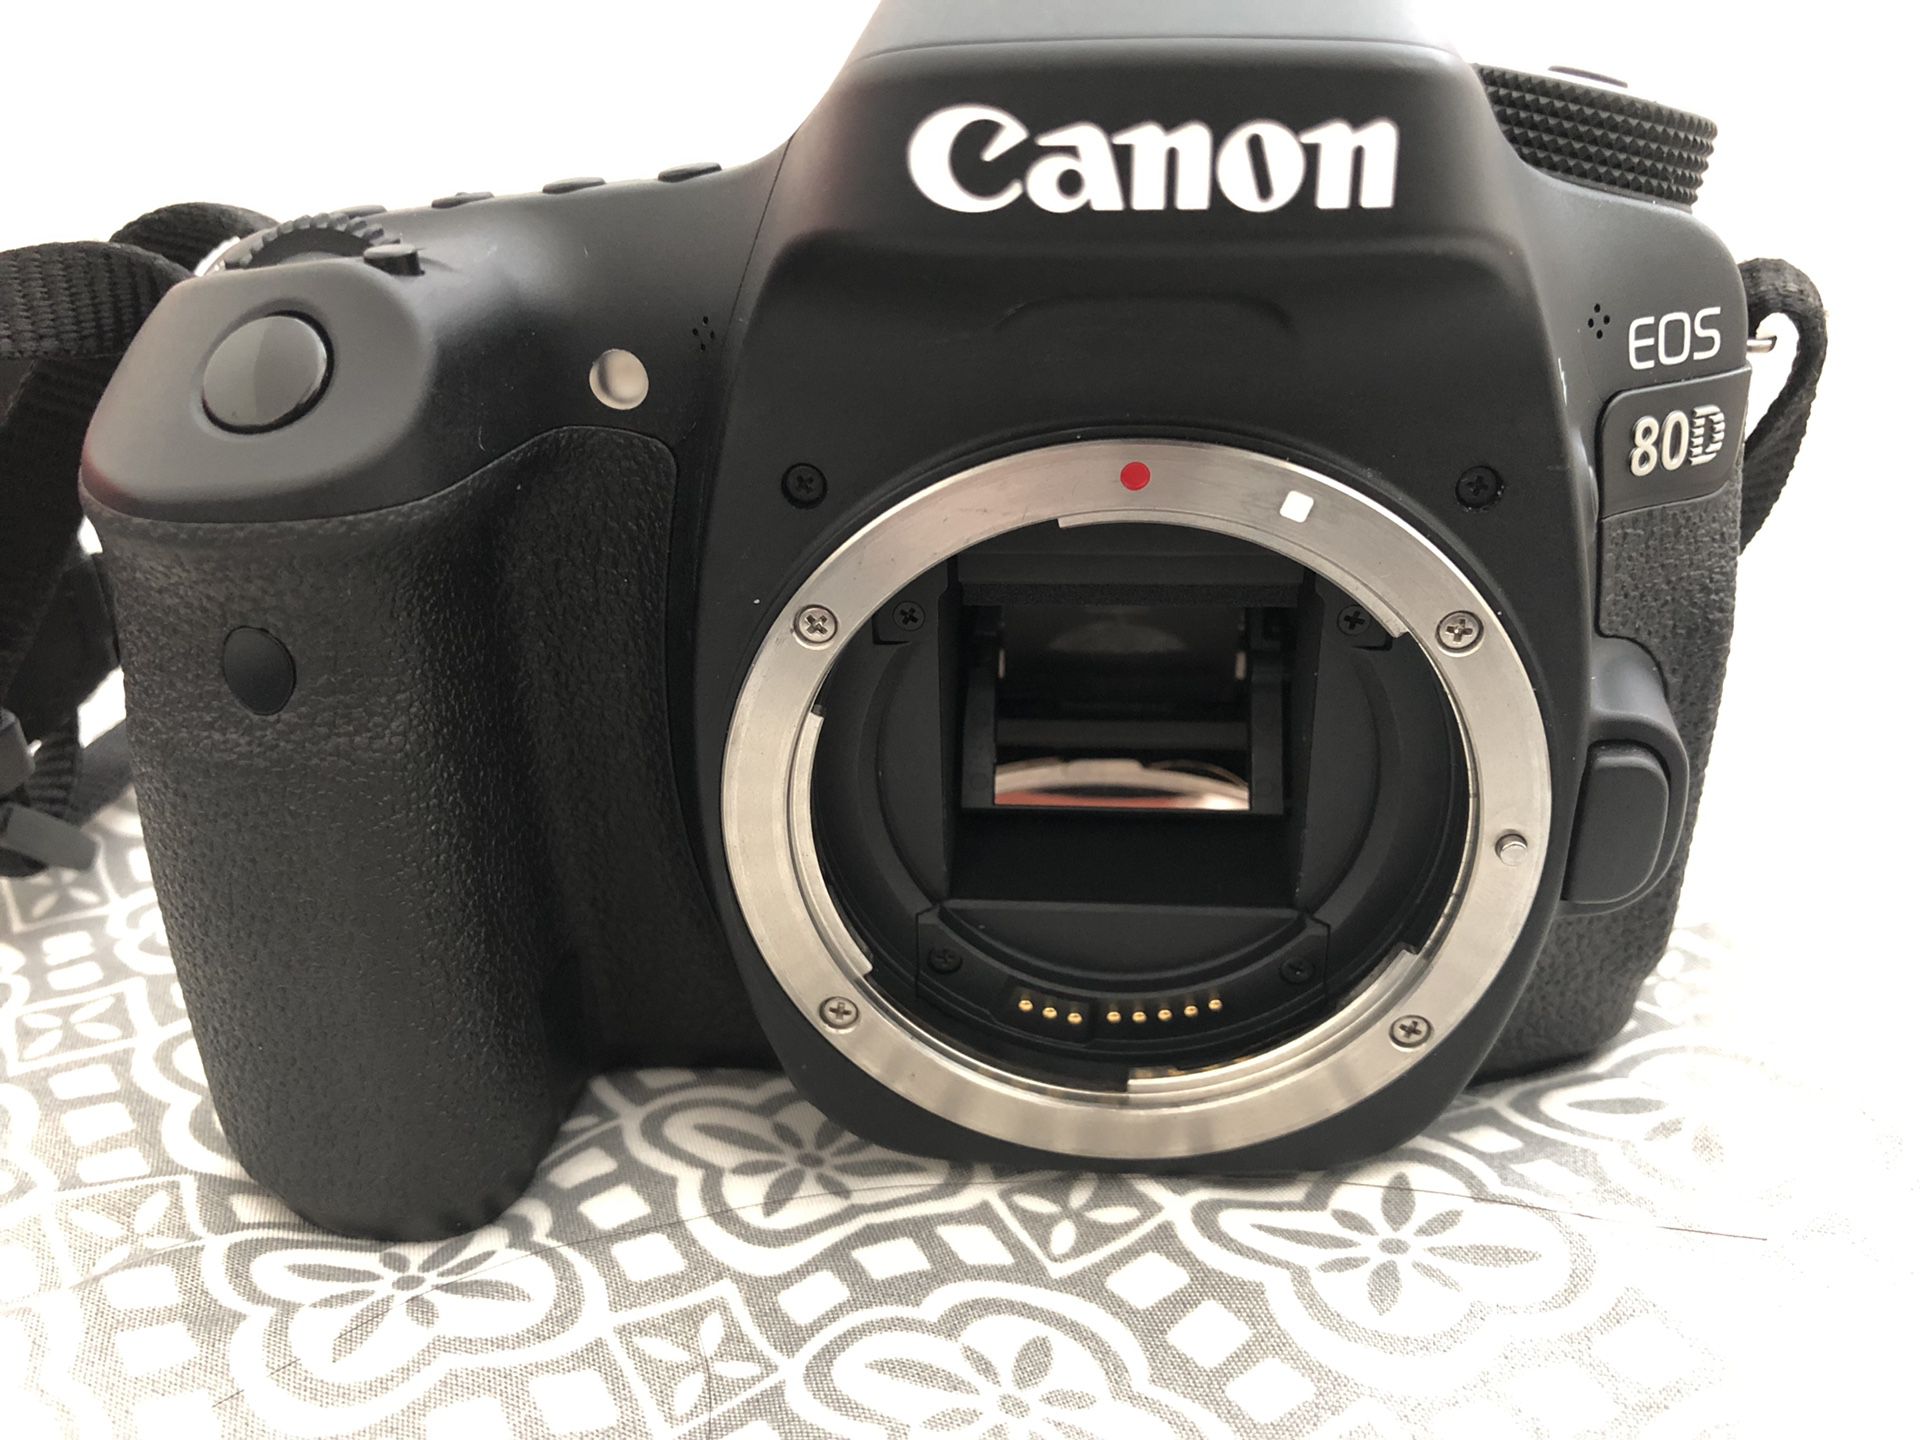 Like New: canon 80D ,canon 17-40mms f4l , SanDisk 256GB Estreme PRO,Zikos battery grip for canon80d